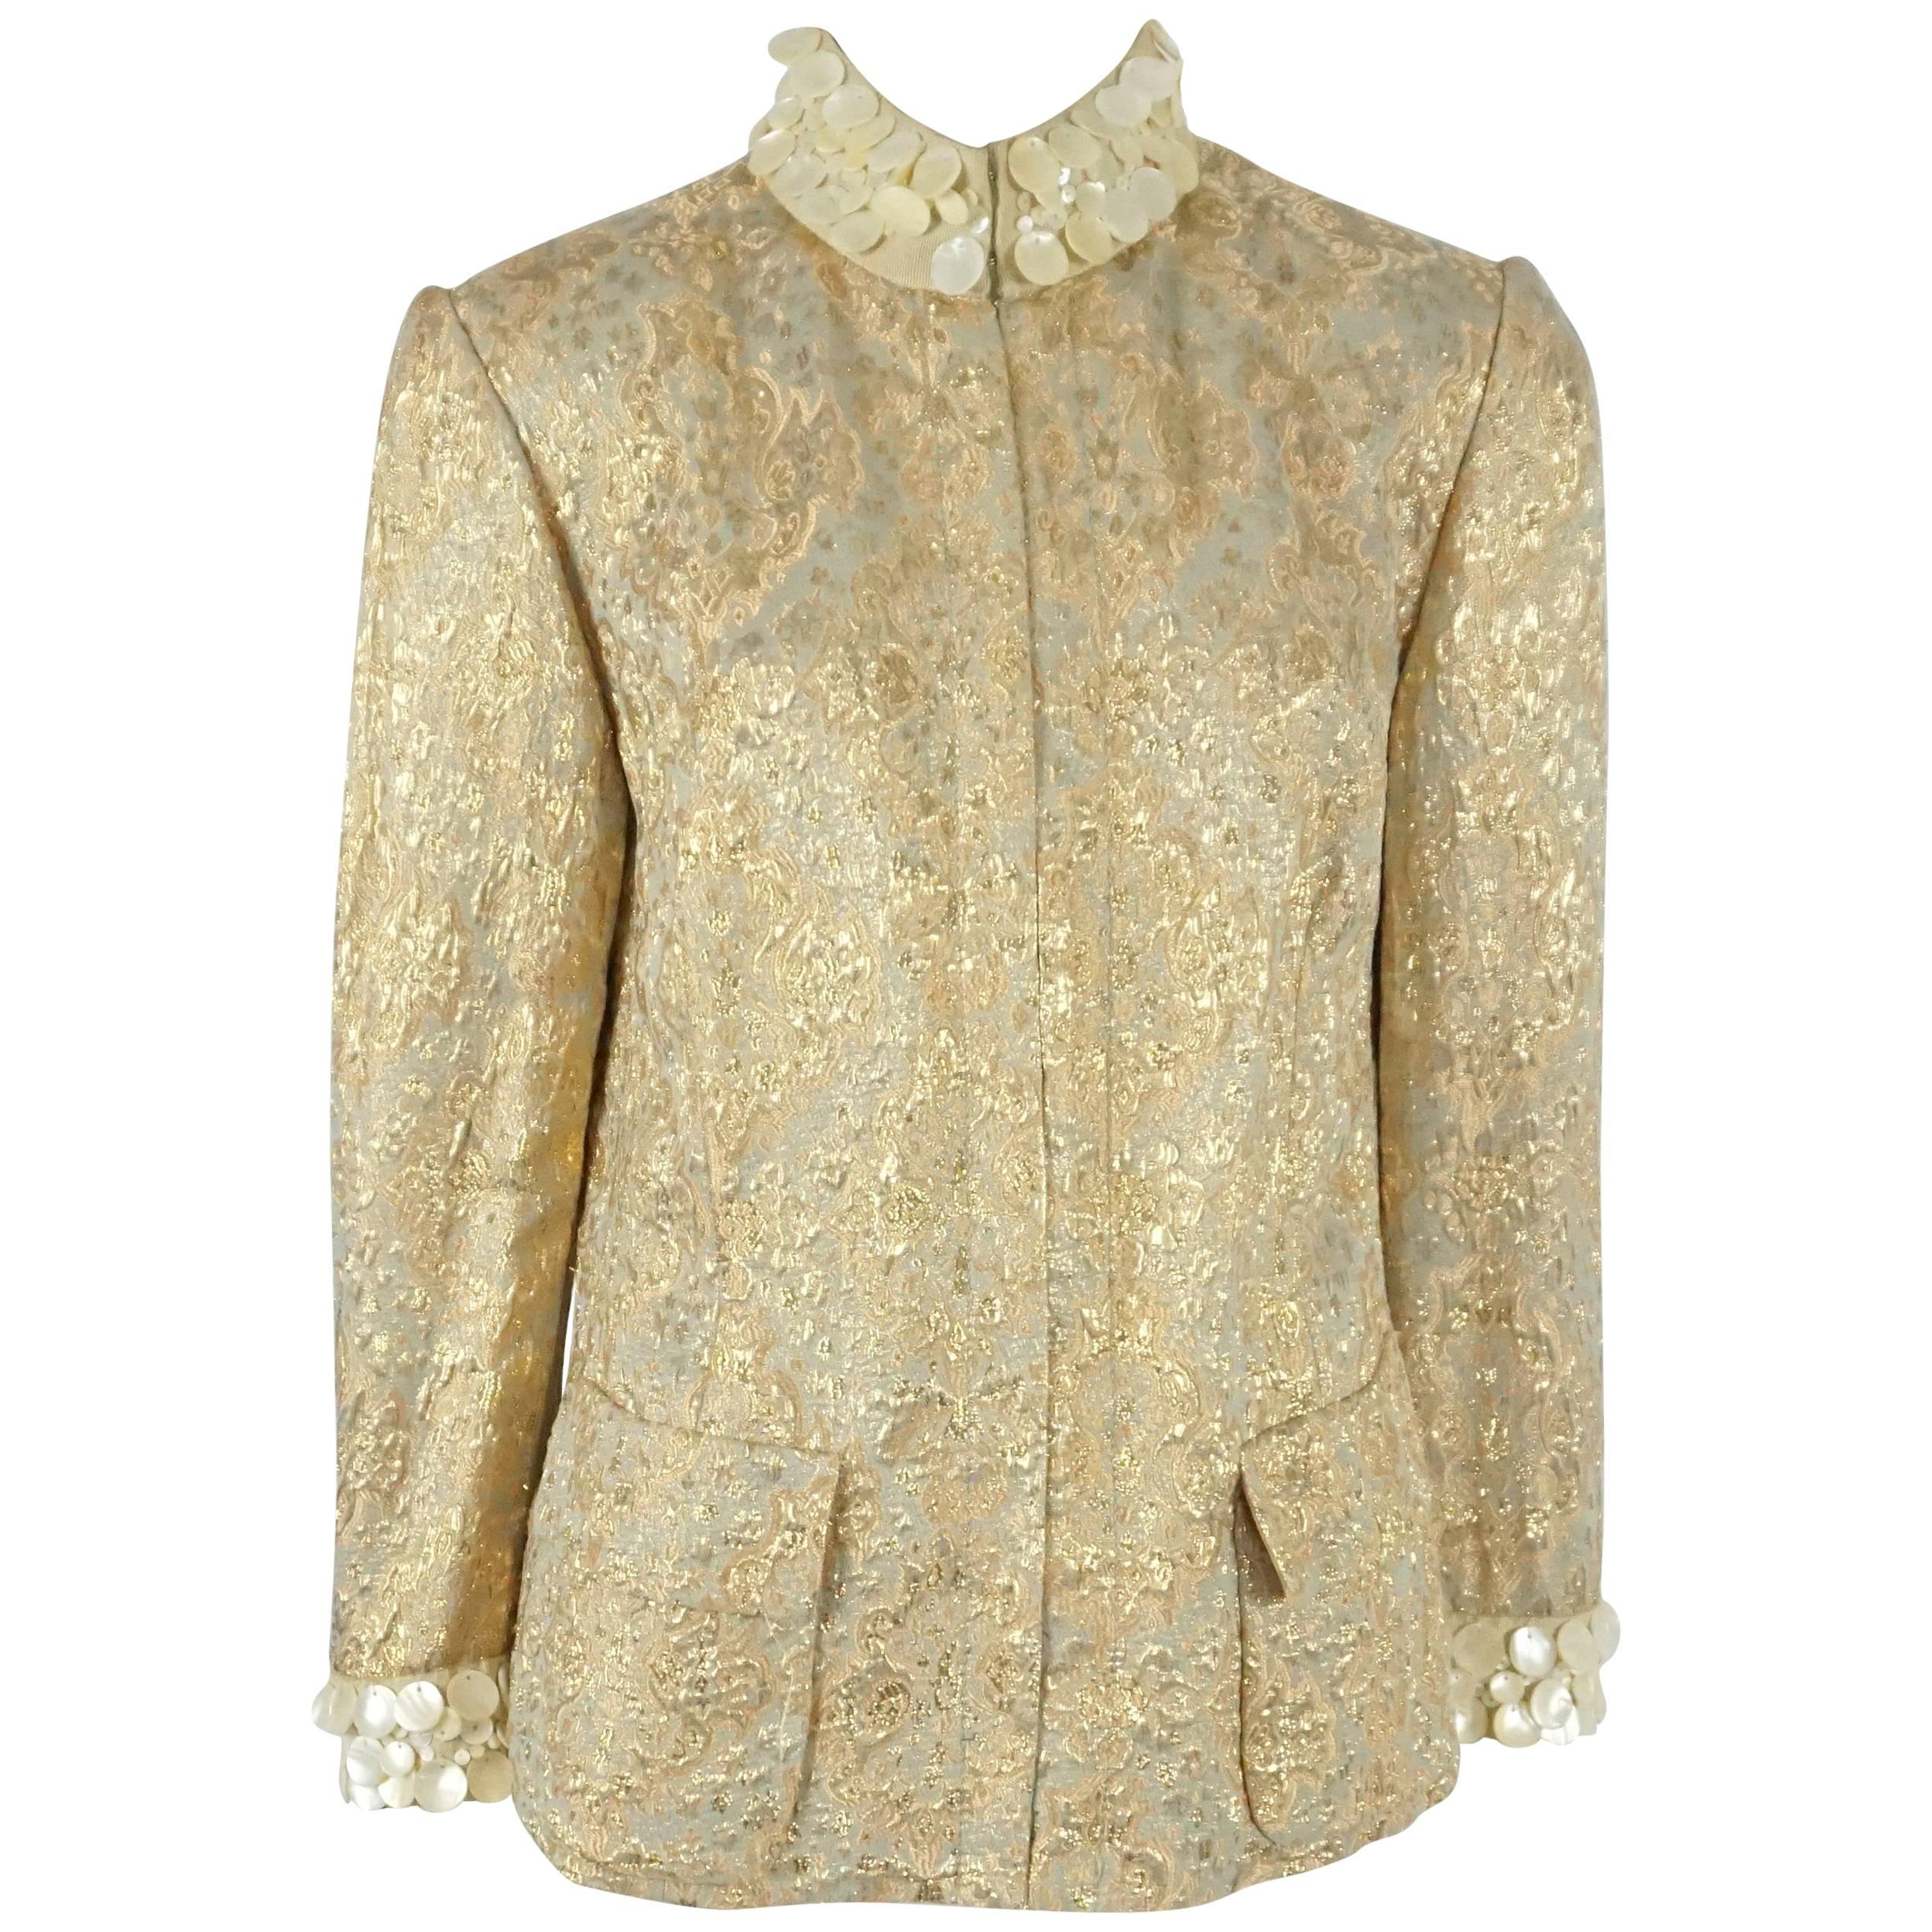 Dolce & Gabanna Silk Gold Brocade Jacket with mother of pearl trim - 44